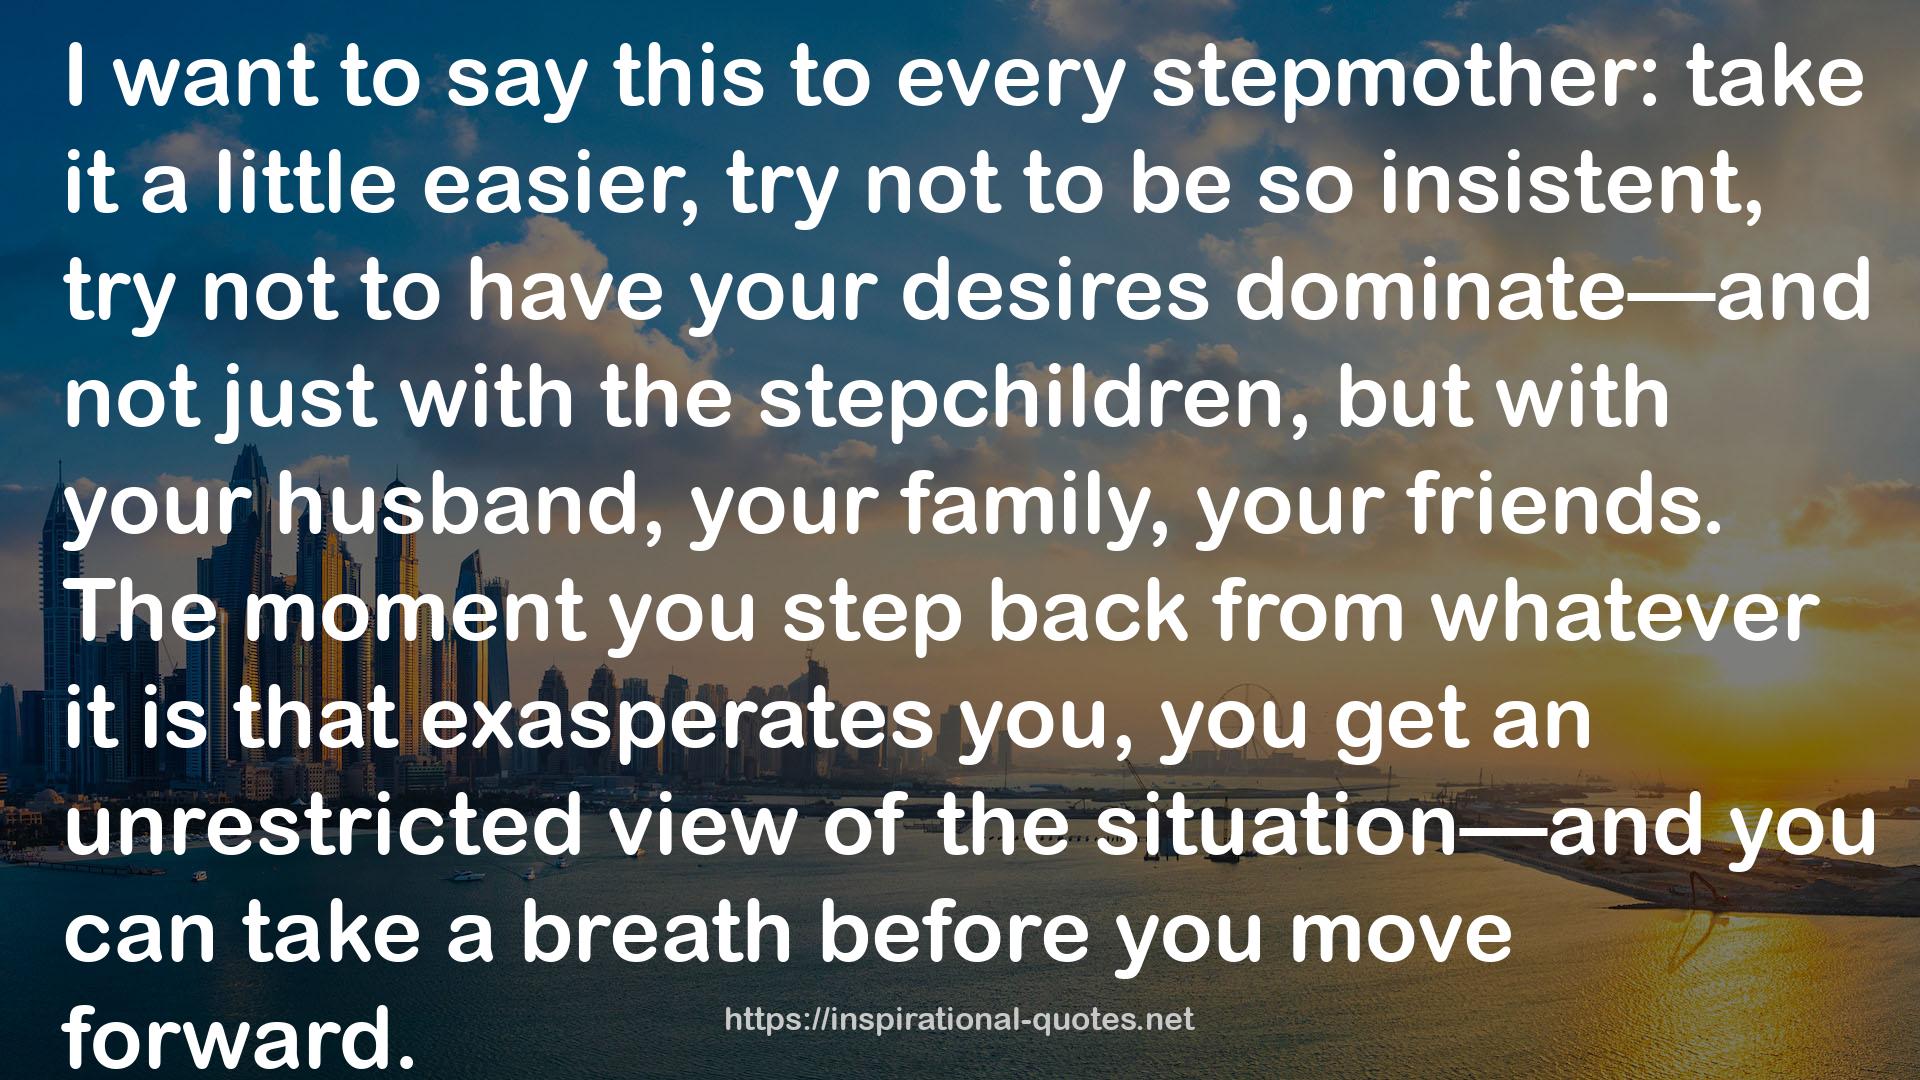 STEP BACK: A Stepmother's Handbook QUOTES